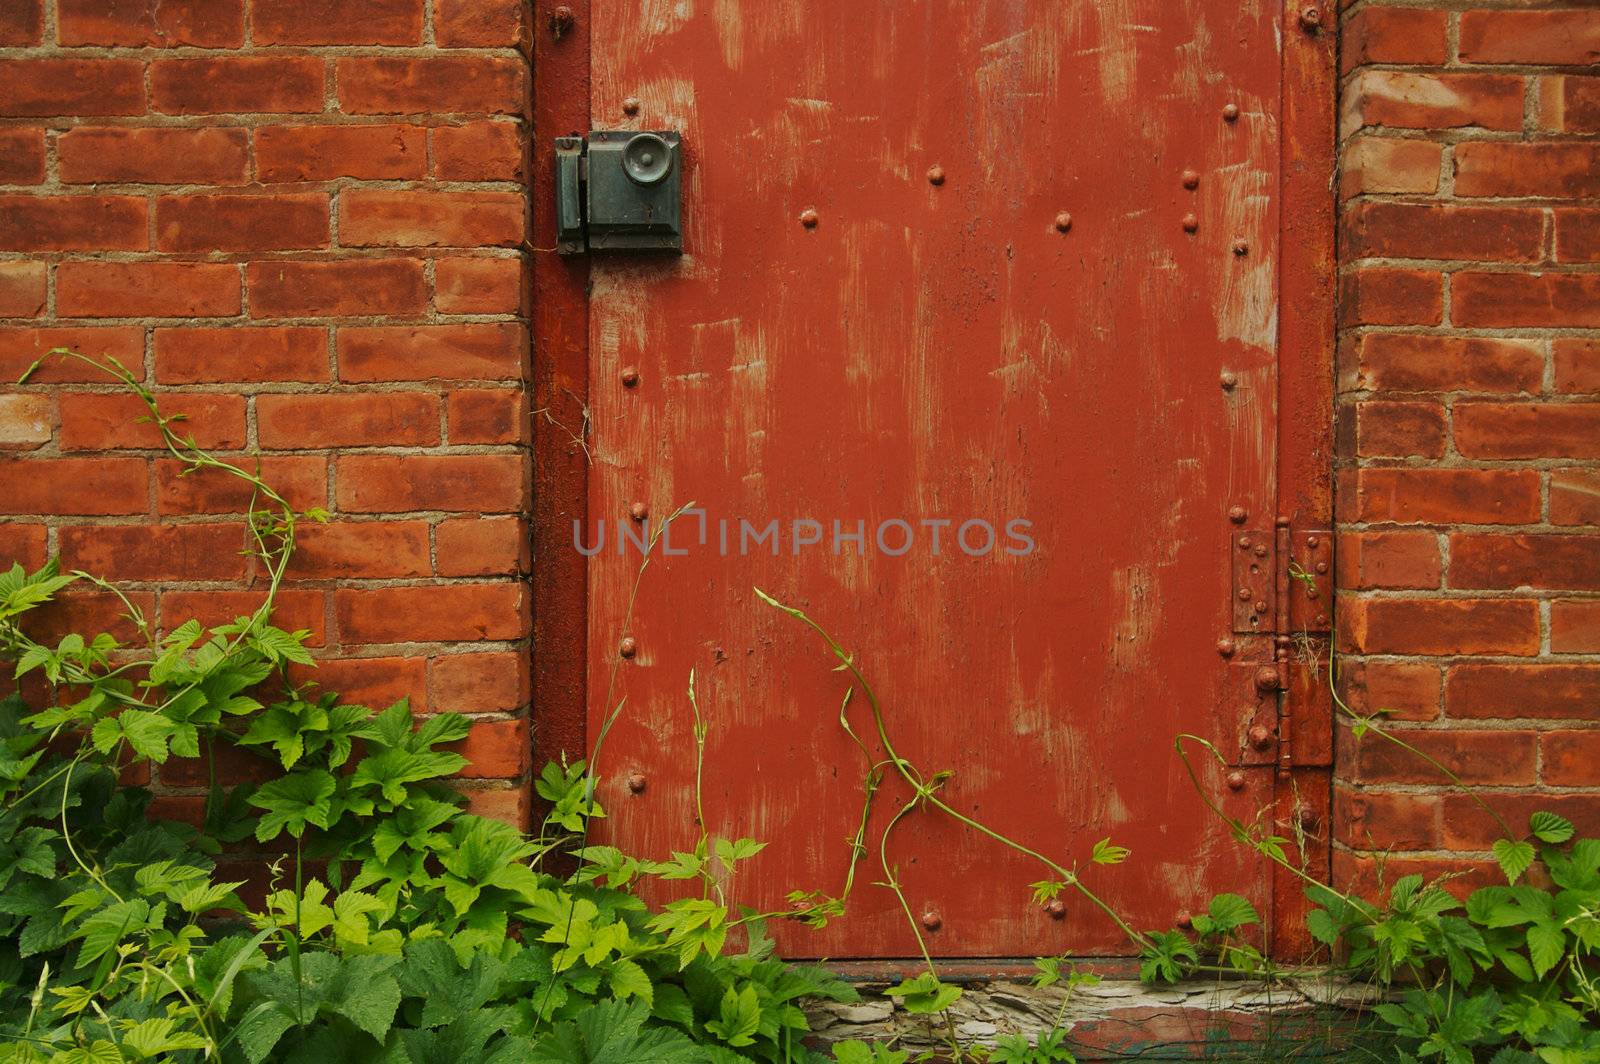 Abstract Vintage Red Door, Brick Wall and Green Vines.